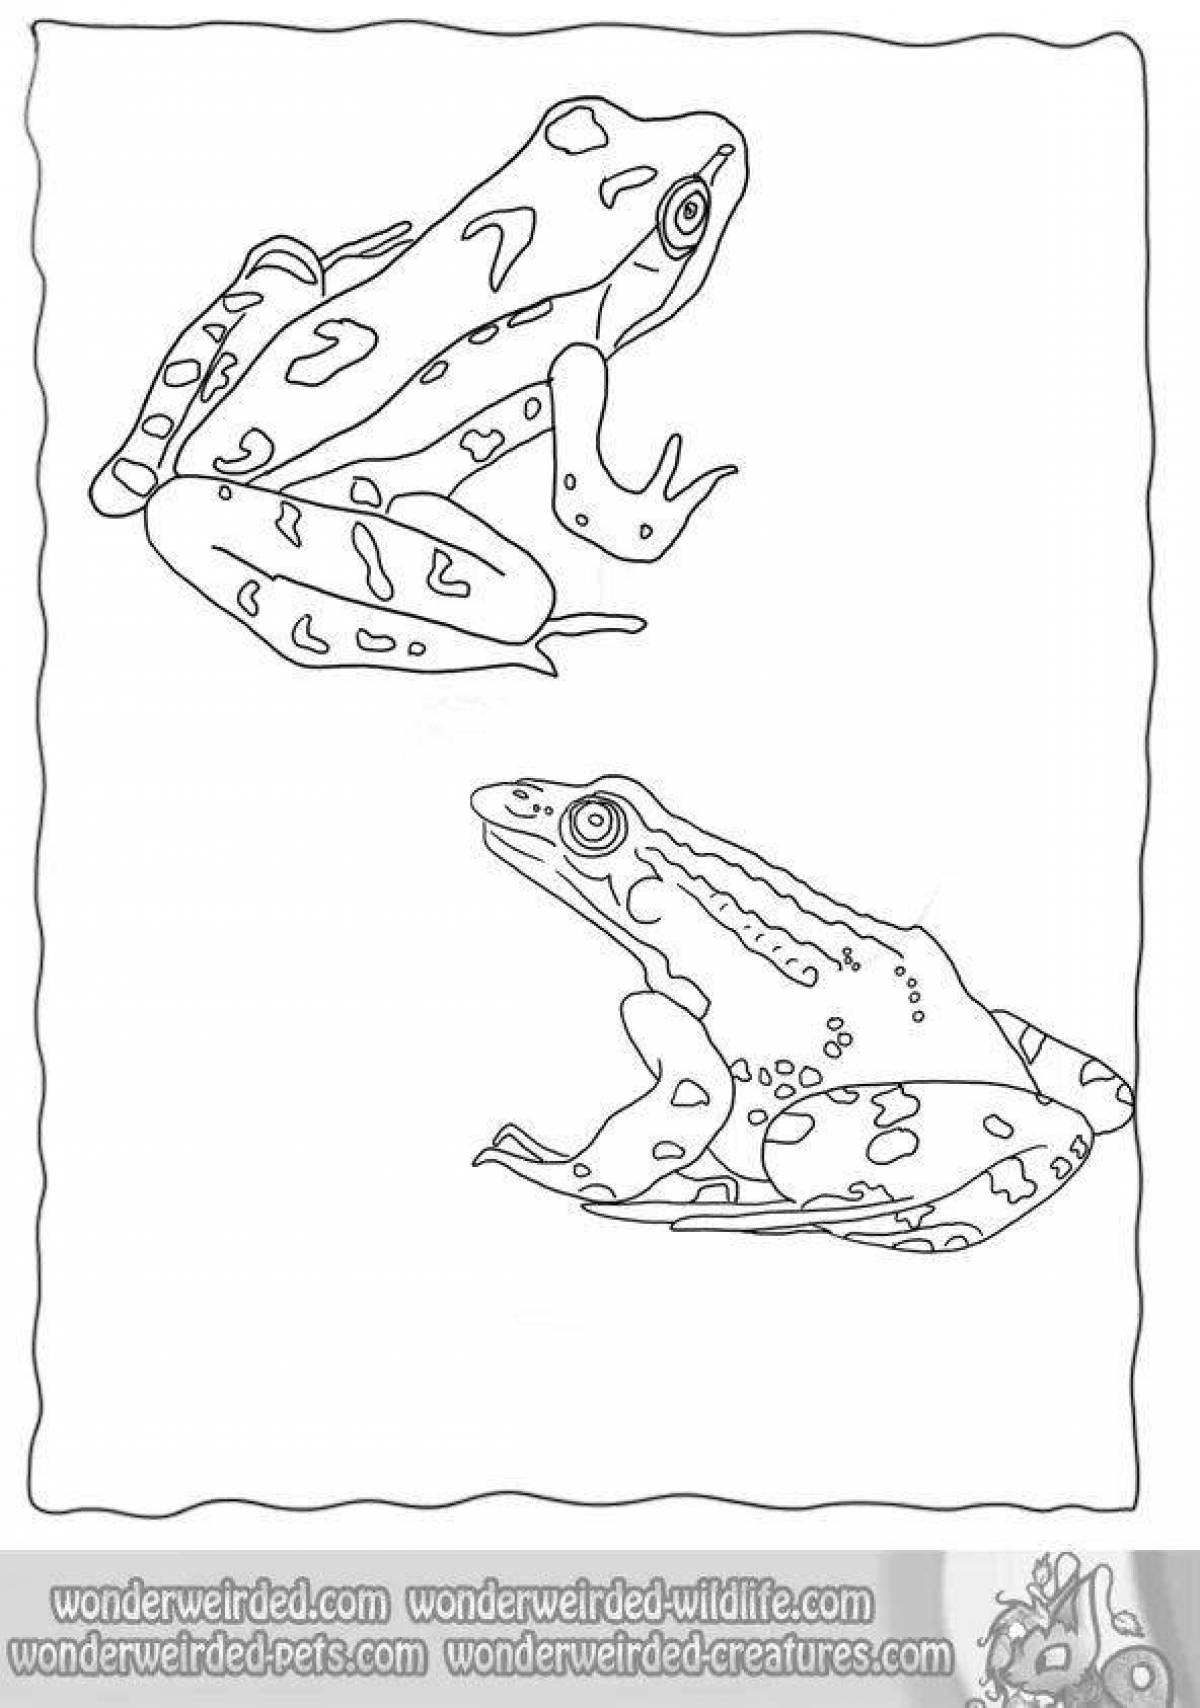 Coloring page exquisite frog aesthetics